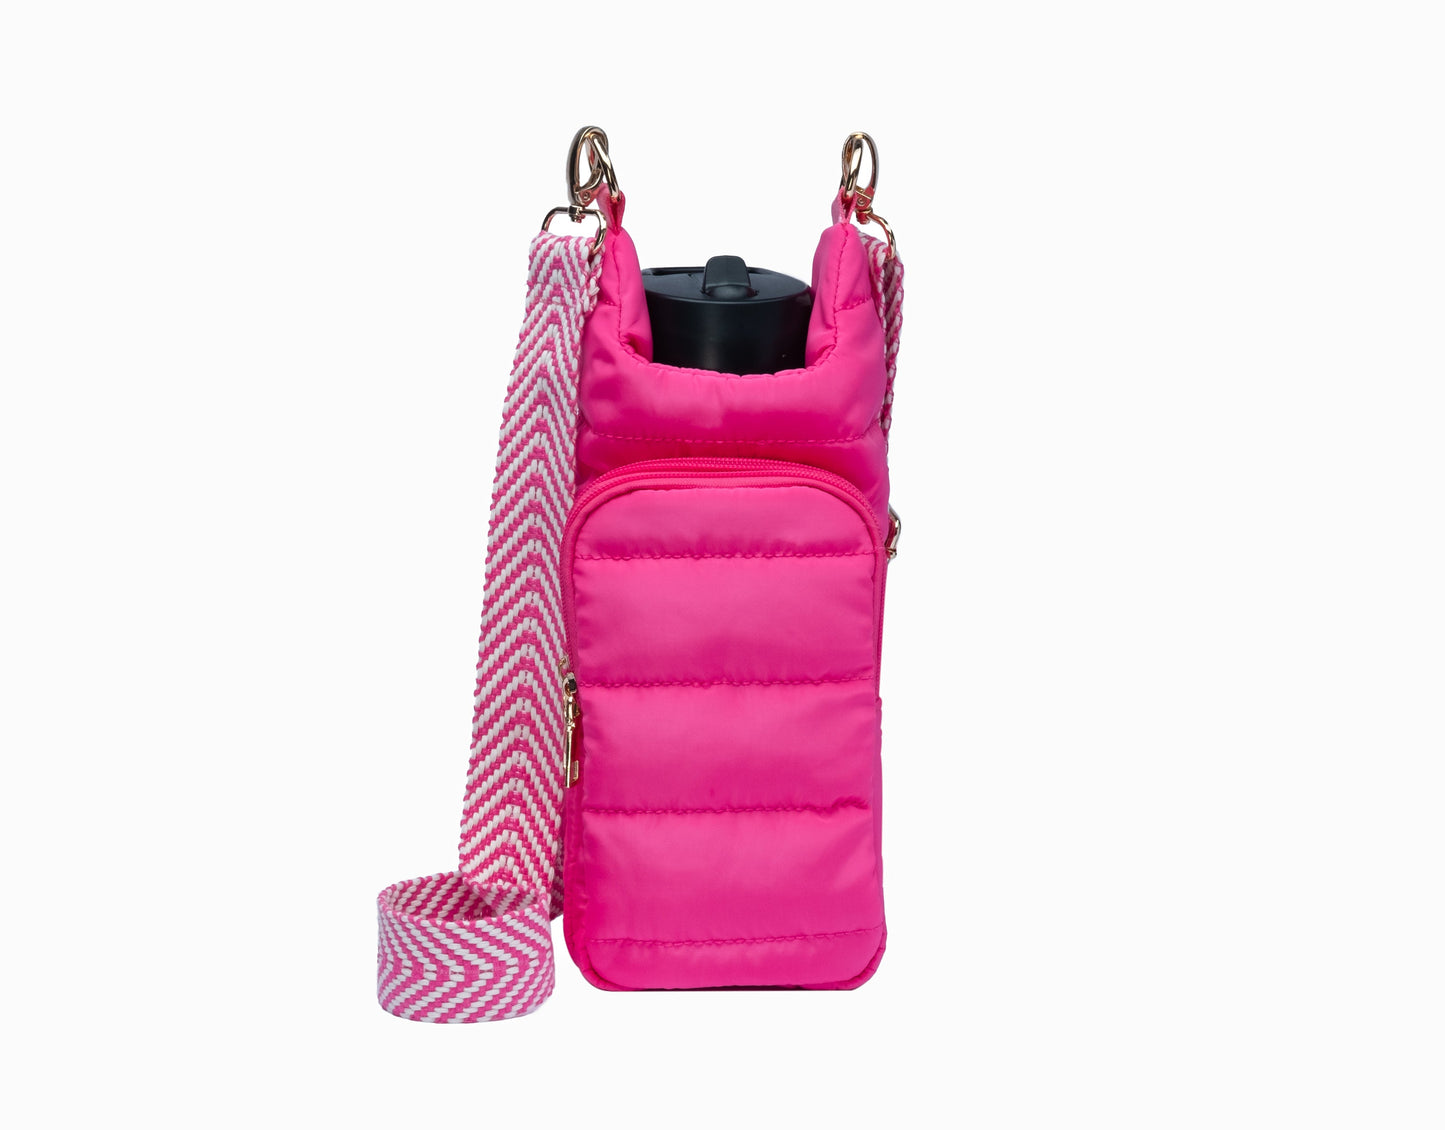 Wholesale Packs (2, 6, or 10) - Dark Pink HydroBag with Cream/Pink Strap